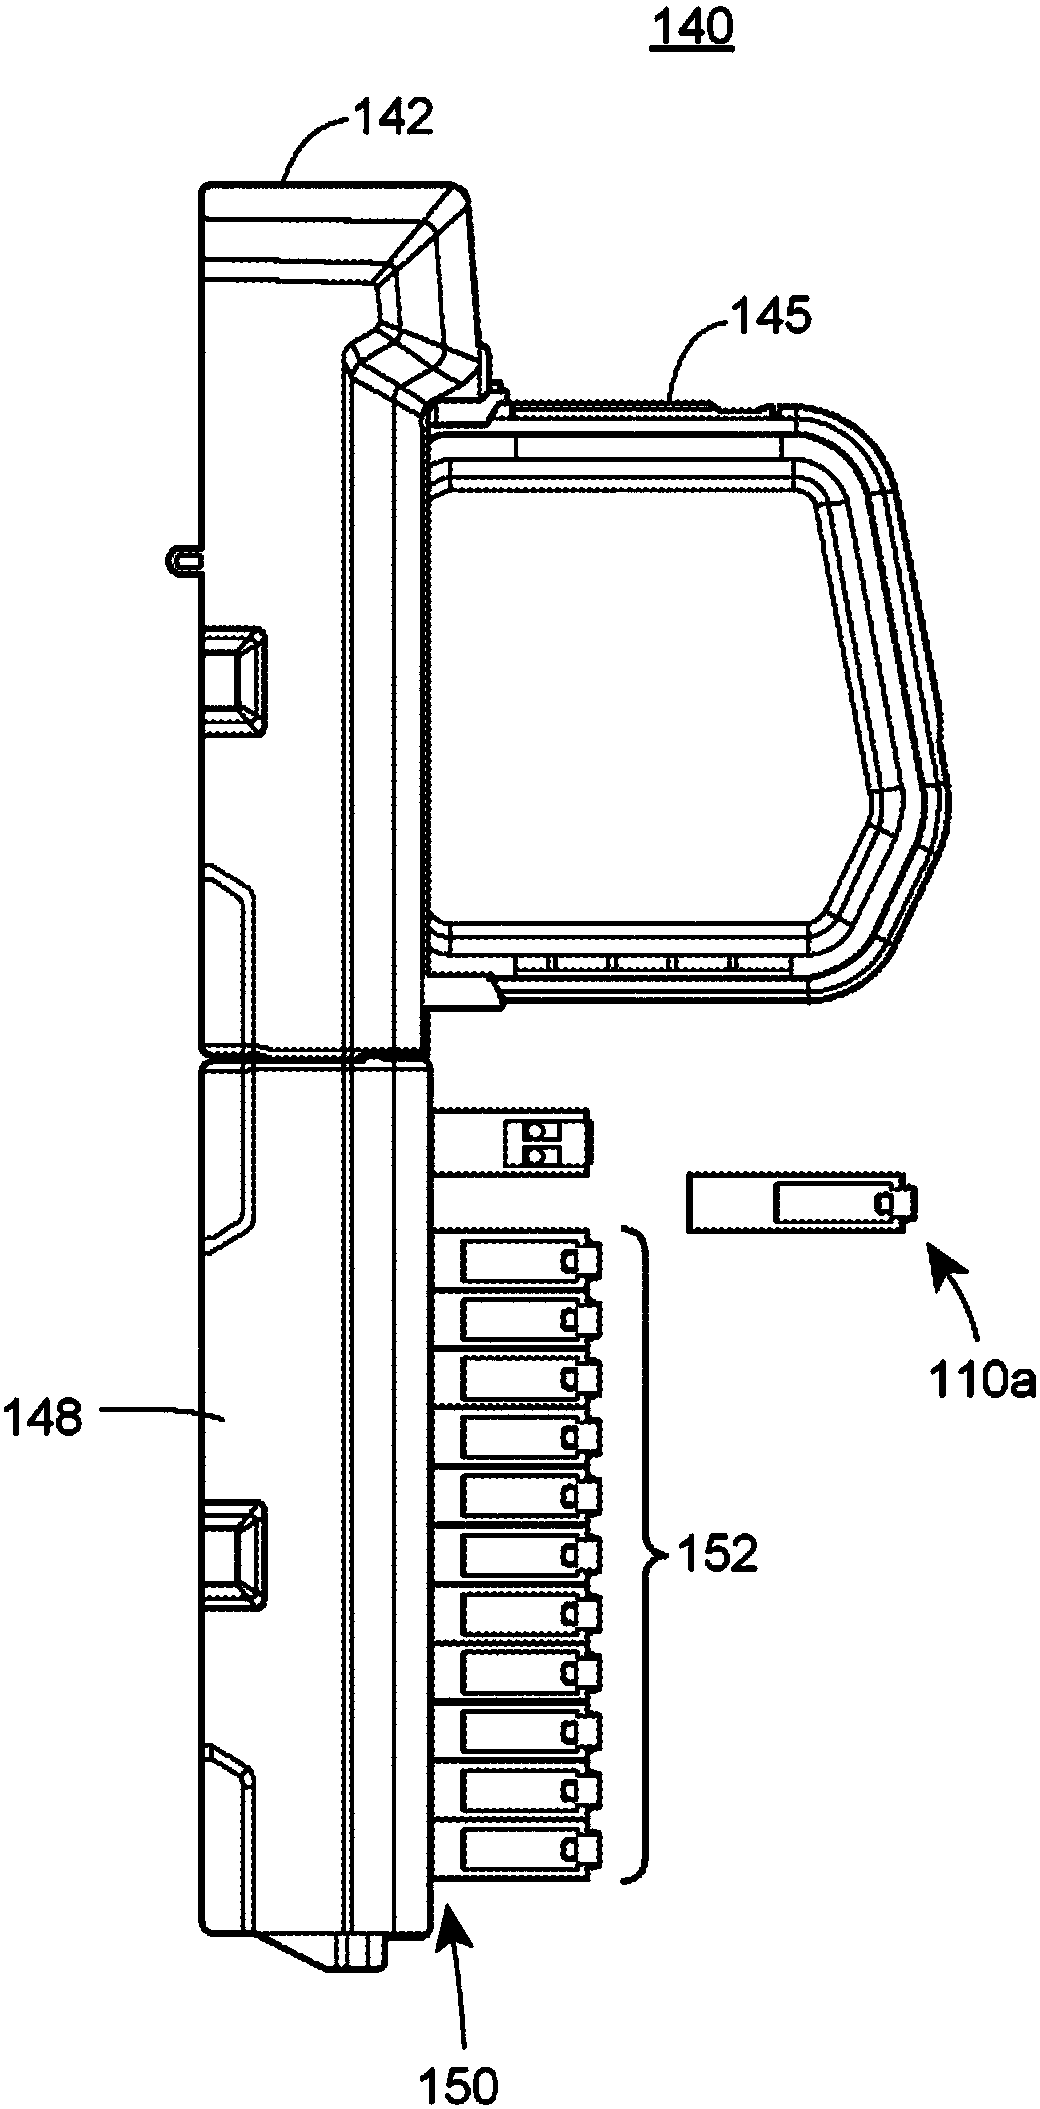 Determining device system tags for commissioning portions of a disconnected process control loop